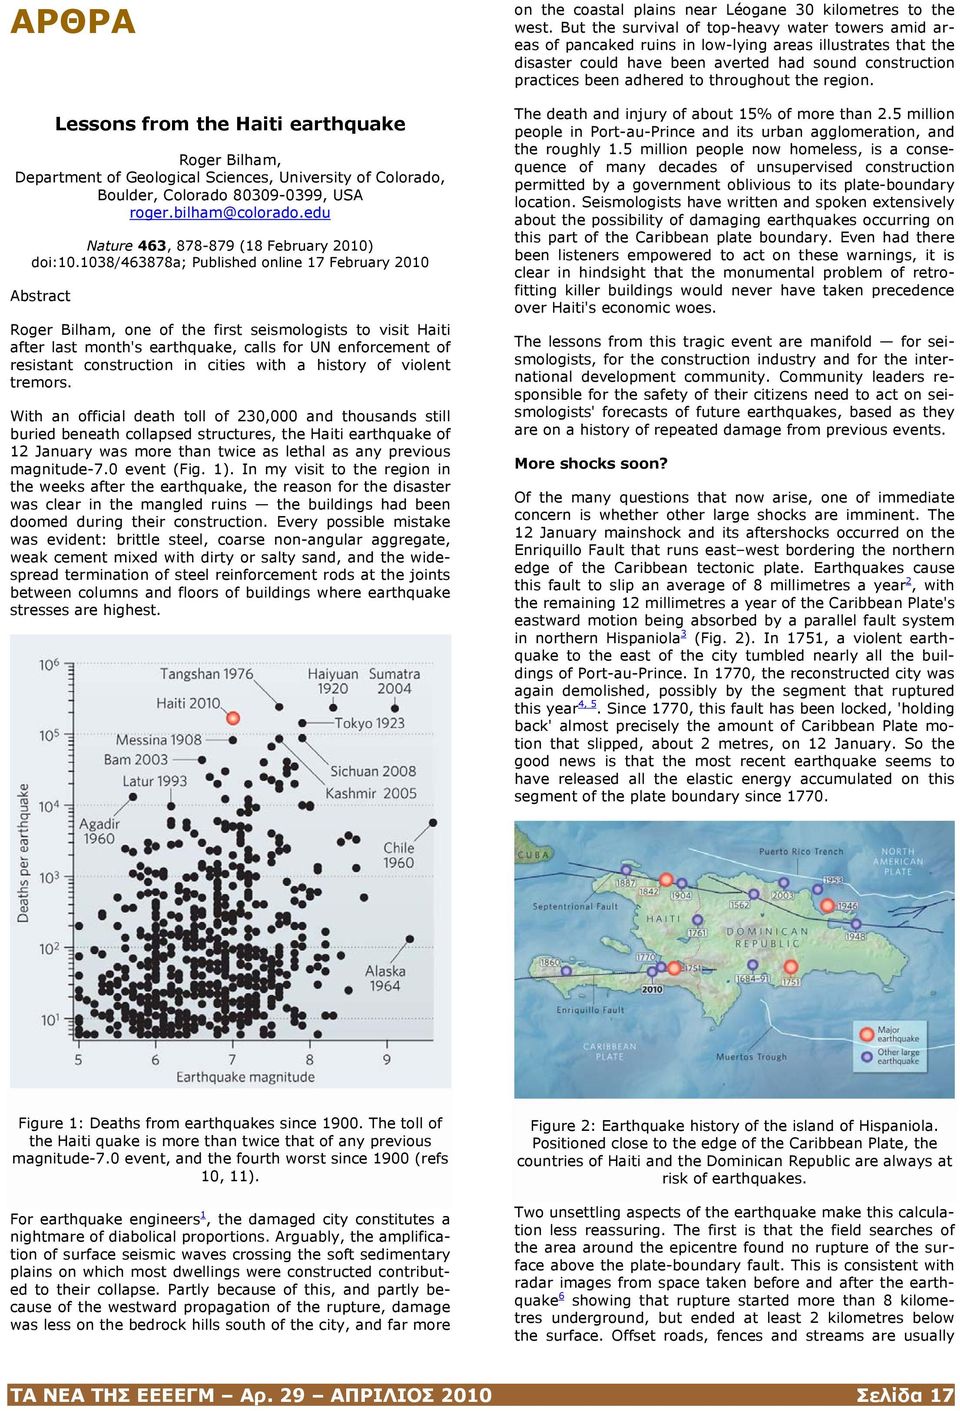 1038/463878a; Published online 17 February 2010 Abstract Roger Bilham, one of the first seismologists to visit Haiti after last month's earthquake, calls for UN enforcement of resistant construction